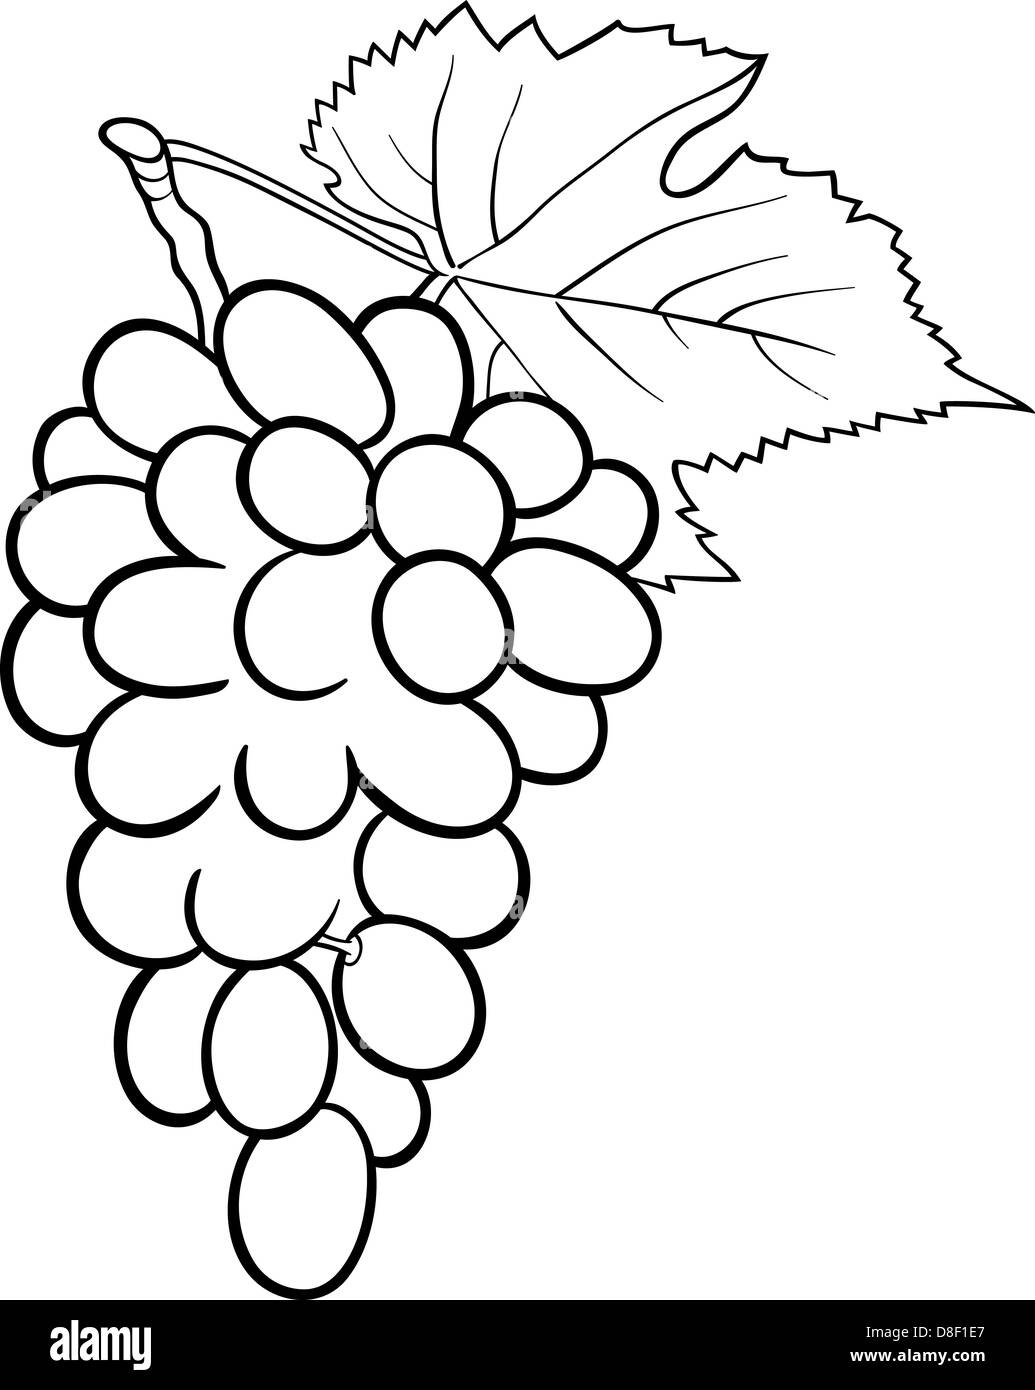 Black and White Cartoon Illustration of Bunch of Grapes or Grapevine Fruit Food Object for Coloring Book Stock Photo